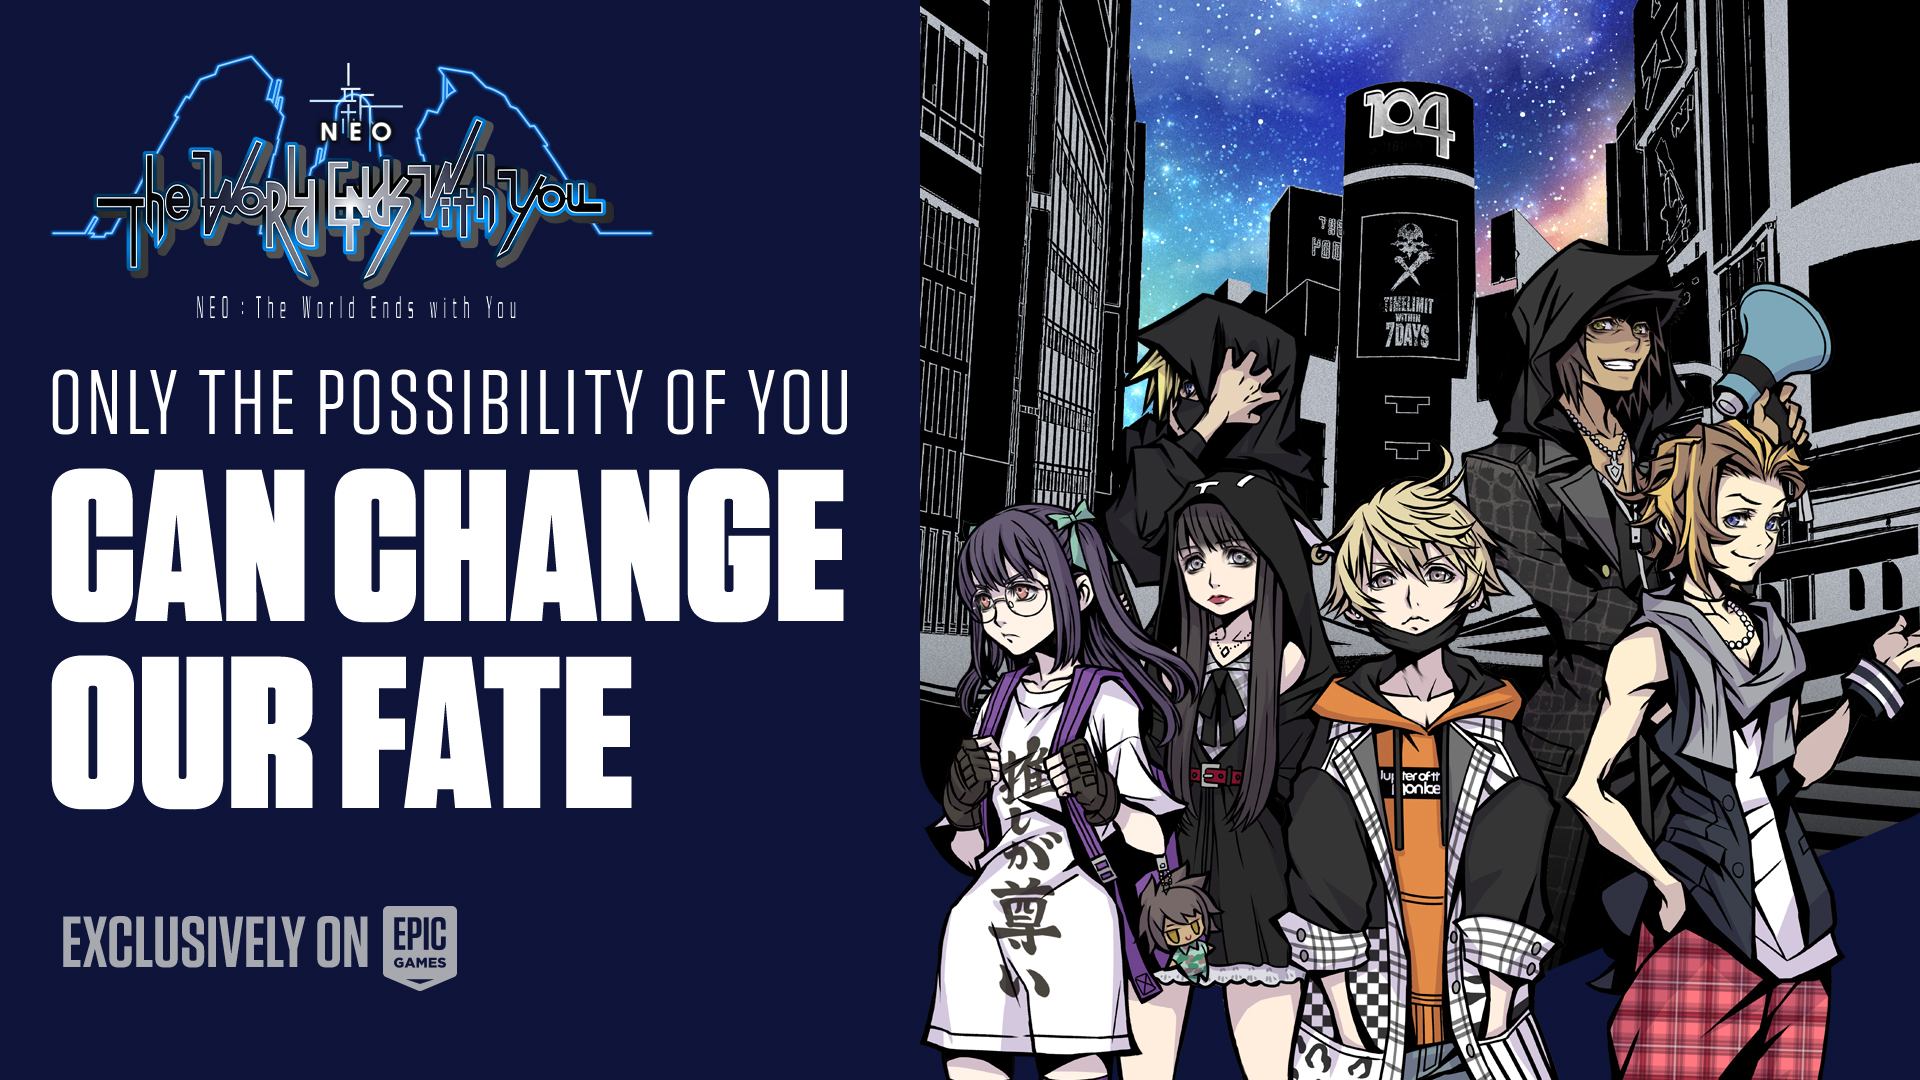 NEO: The World Ends with You | Download and Buy Today - Epic Games Store